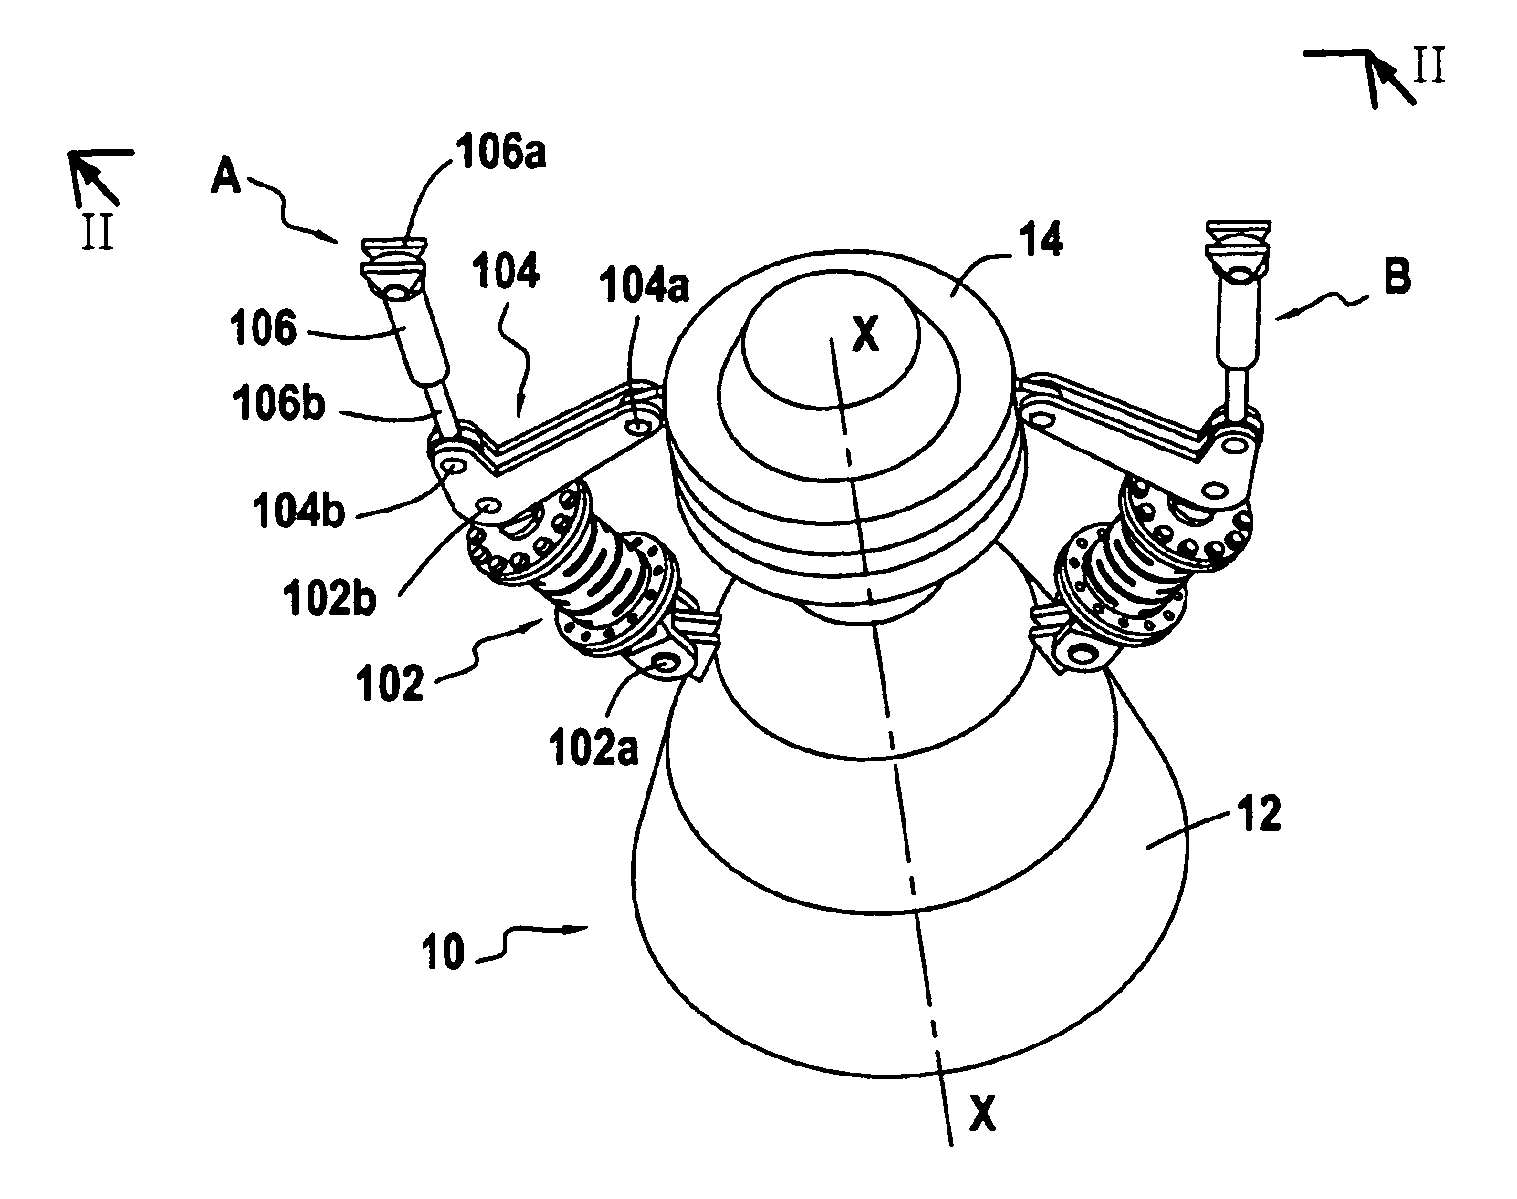 Device for damping the lateral forces due to jet separation acting on a rocket engine nozzle